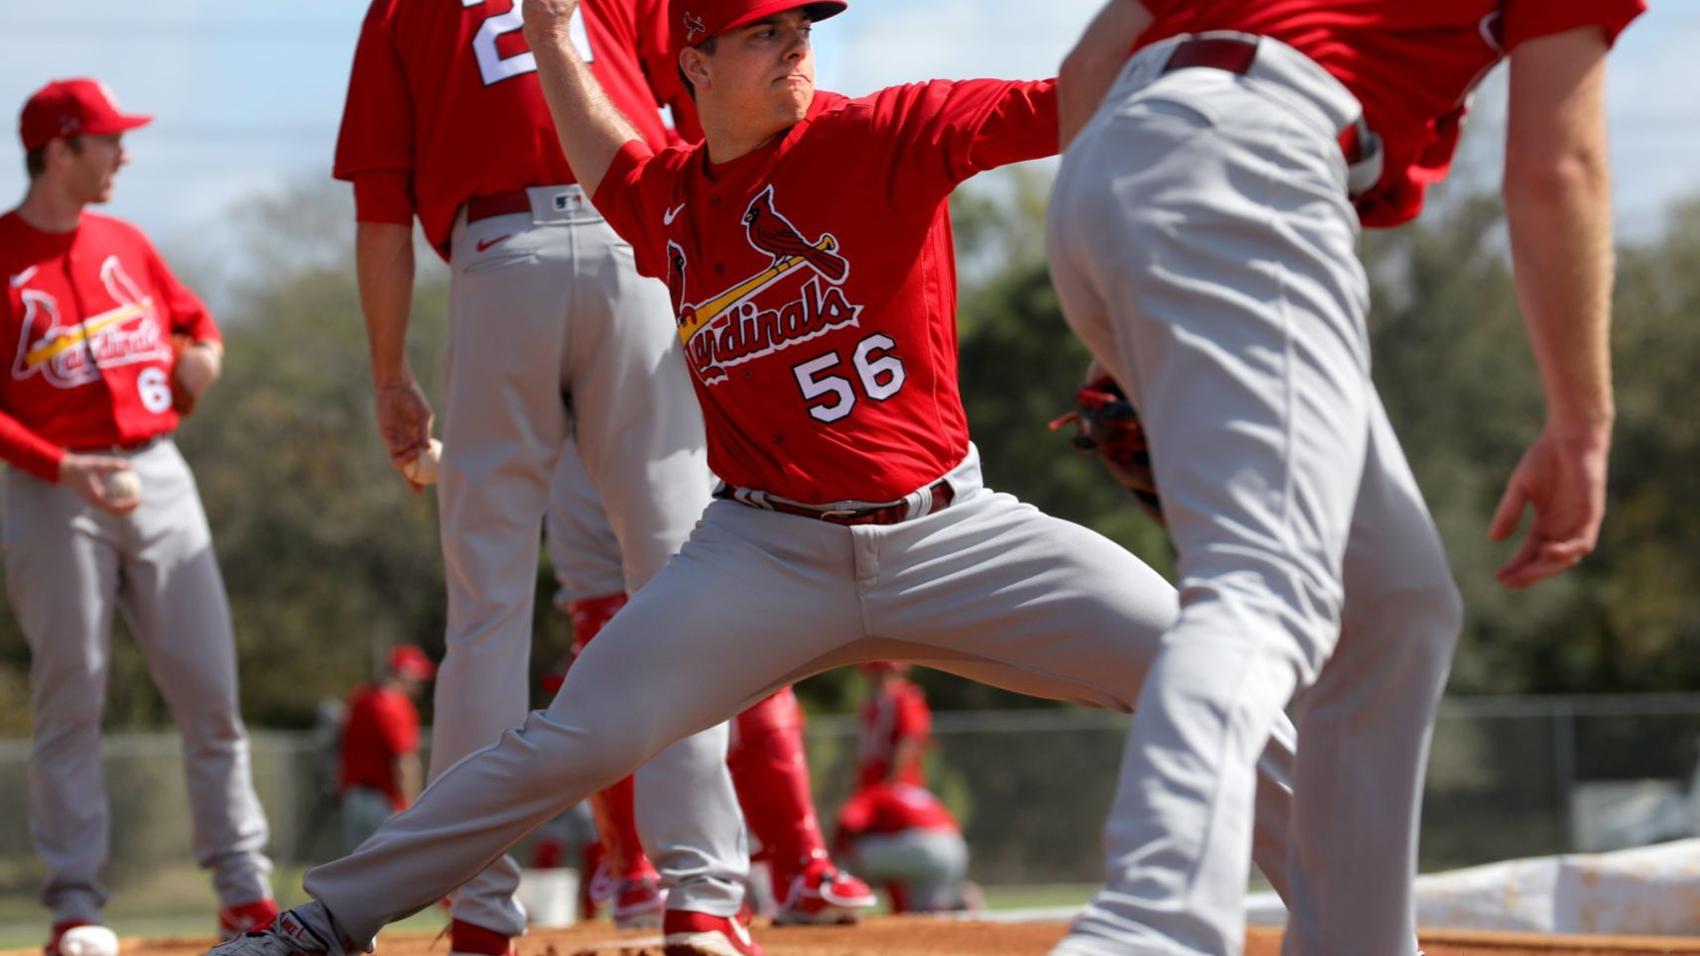 Hochman: For Cardinalsu2019 100-mph fireballer Helsley, improved curveball could be new weapon